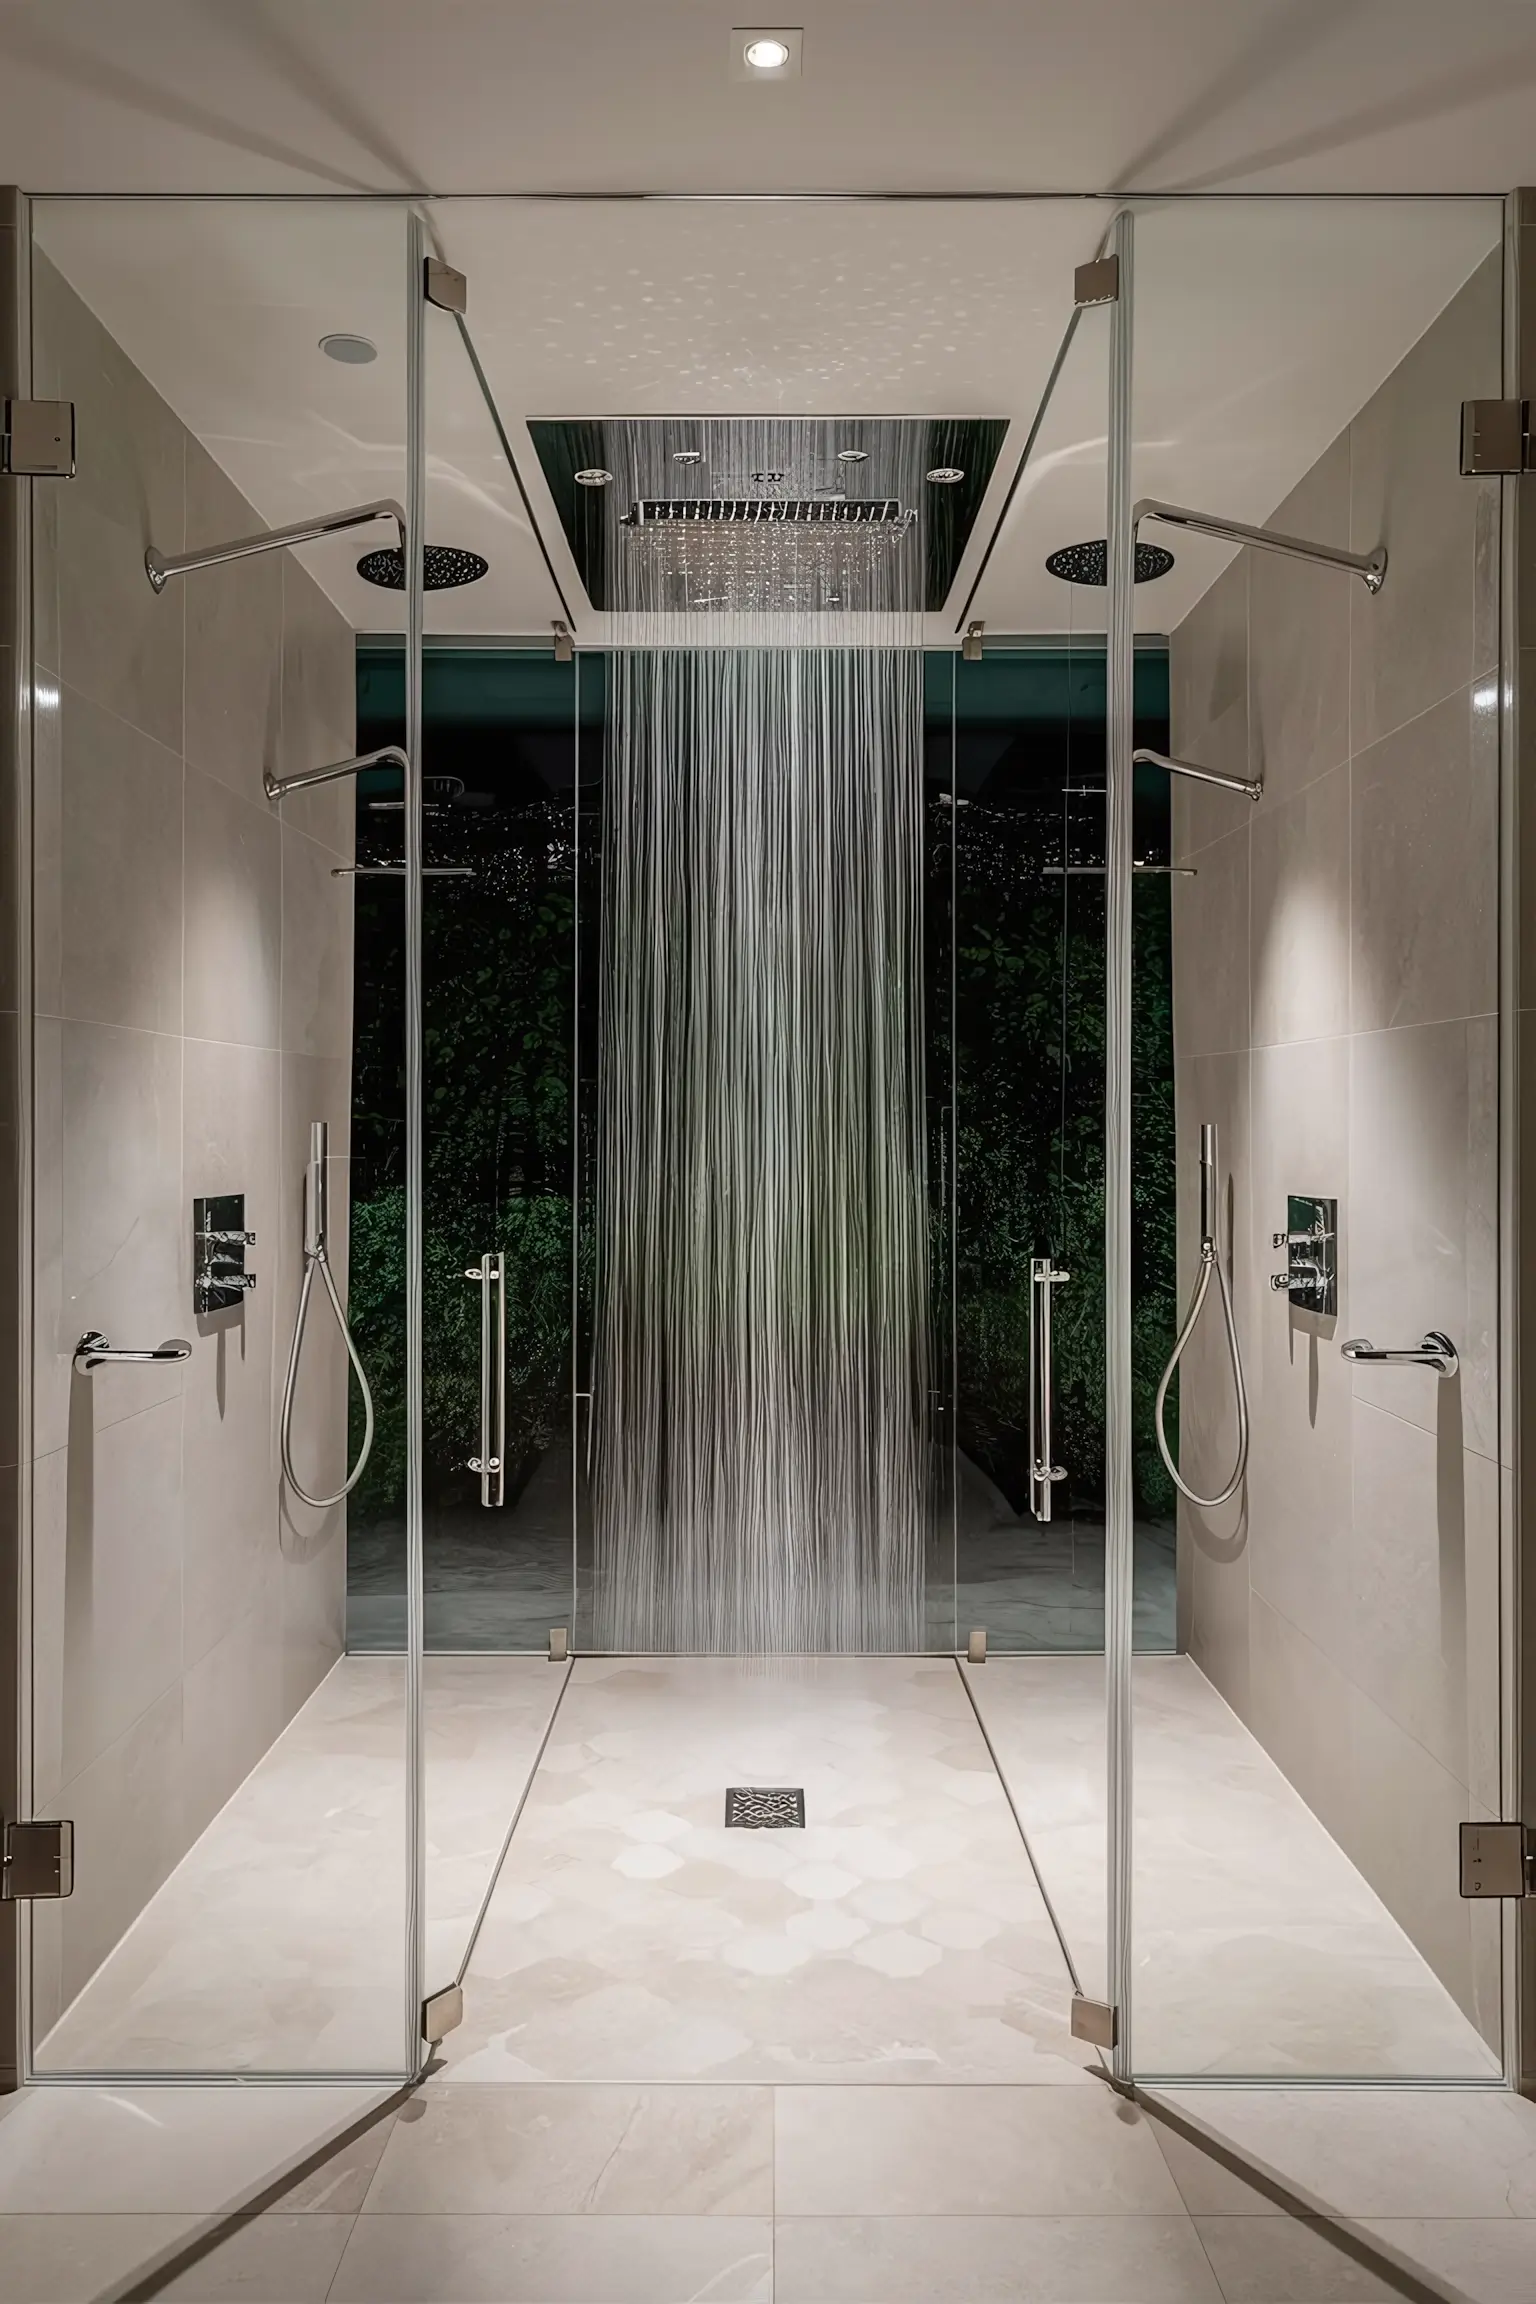 Bathroom remodel with a luxurious shower featuring a rain showerhead and glass enclosure.